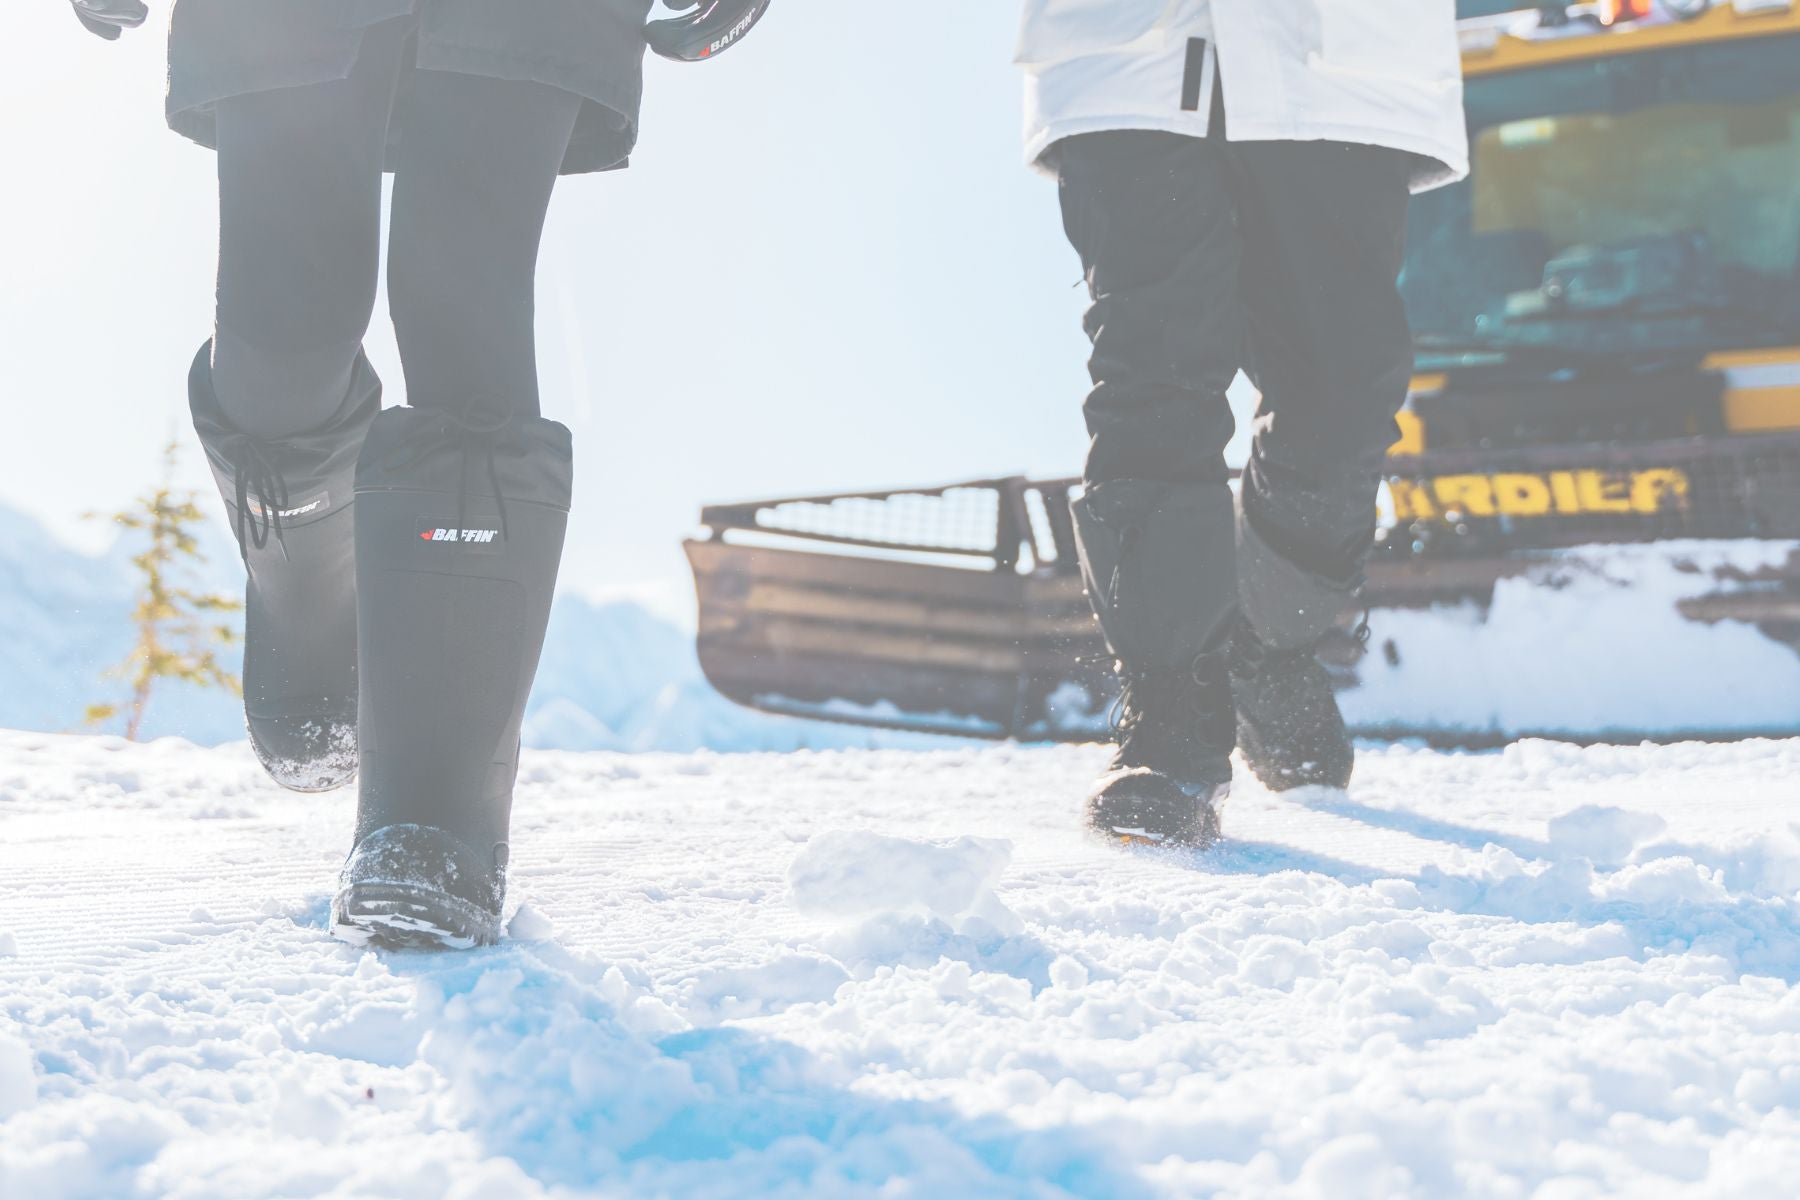 BAFFIN EXTENDS SIZING OF BEST-SELLING HUNT & FISH AND INDUSTRIAL BOOT FOR MORE INCLUSIVE FIT